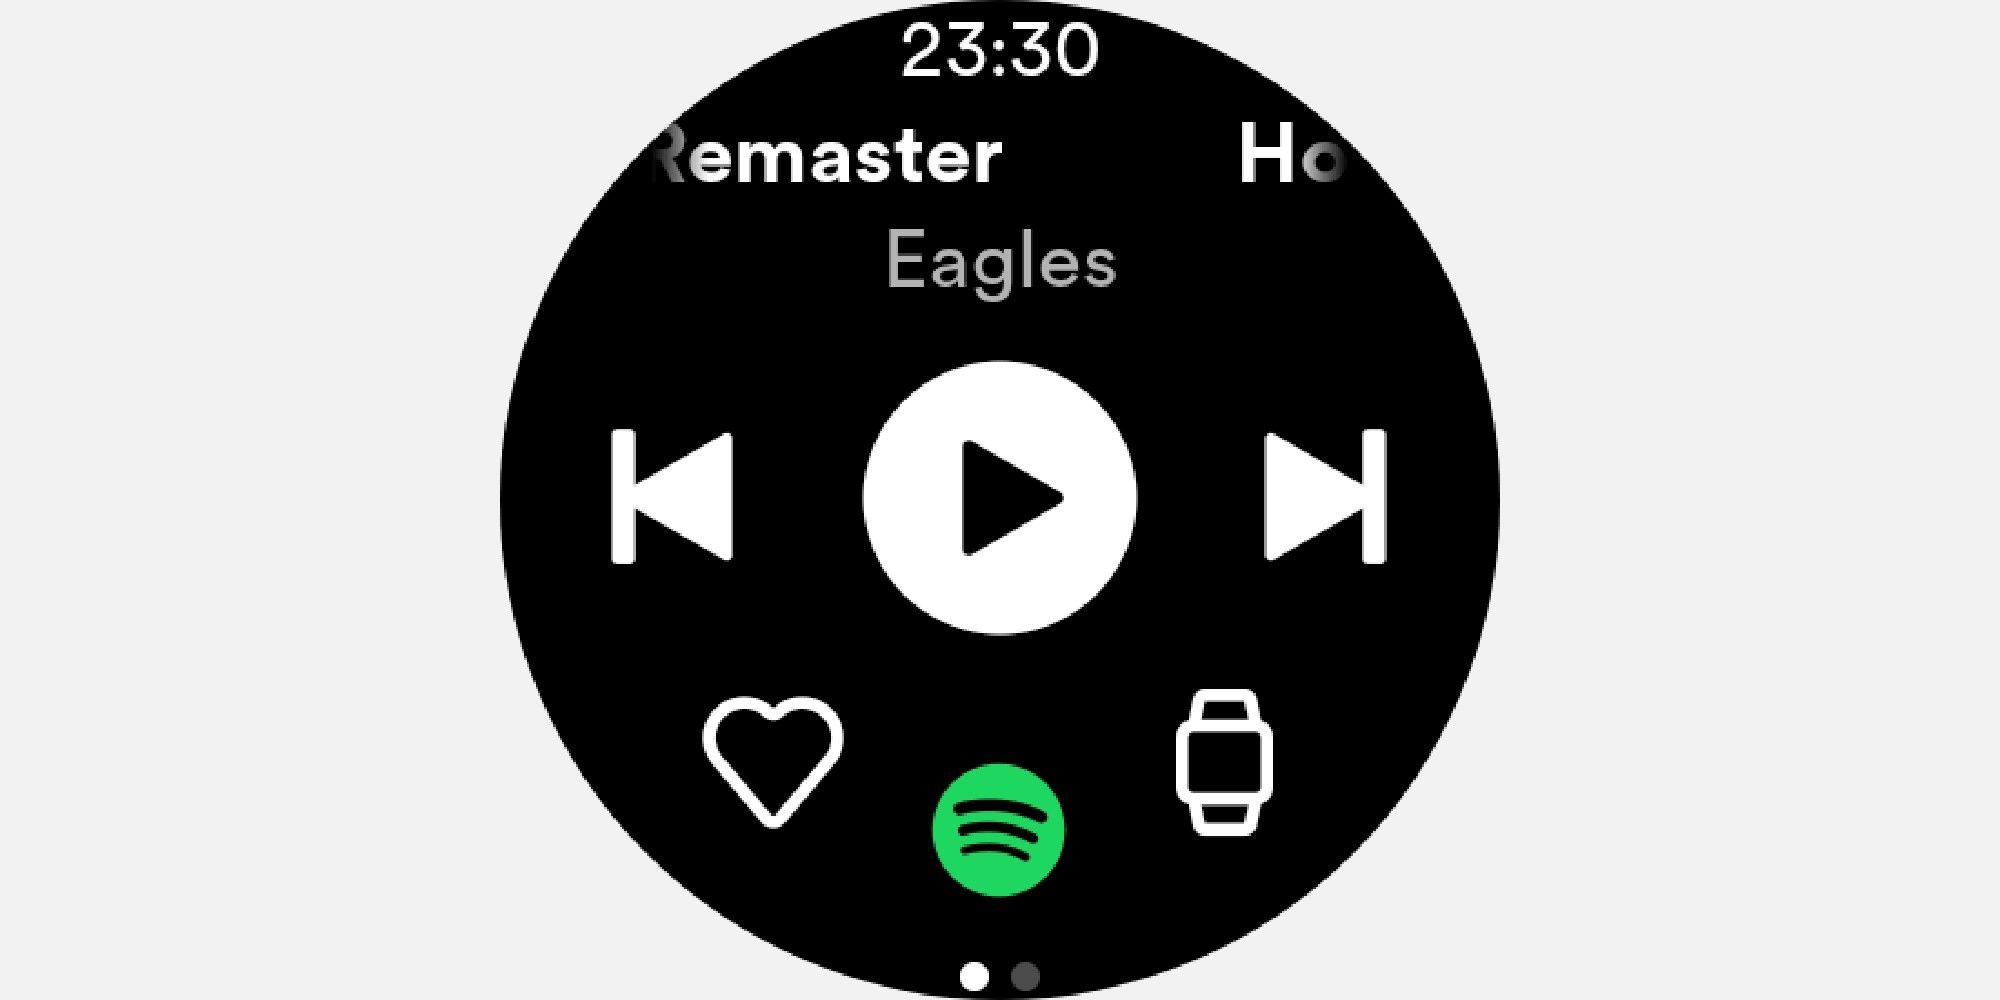 Play on tracks on Spotify on smartwatch